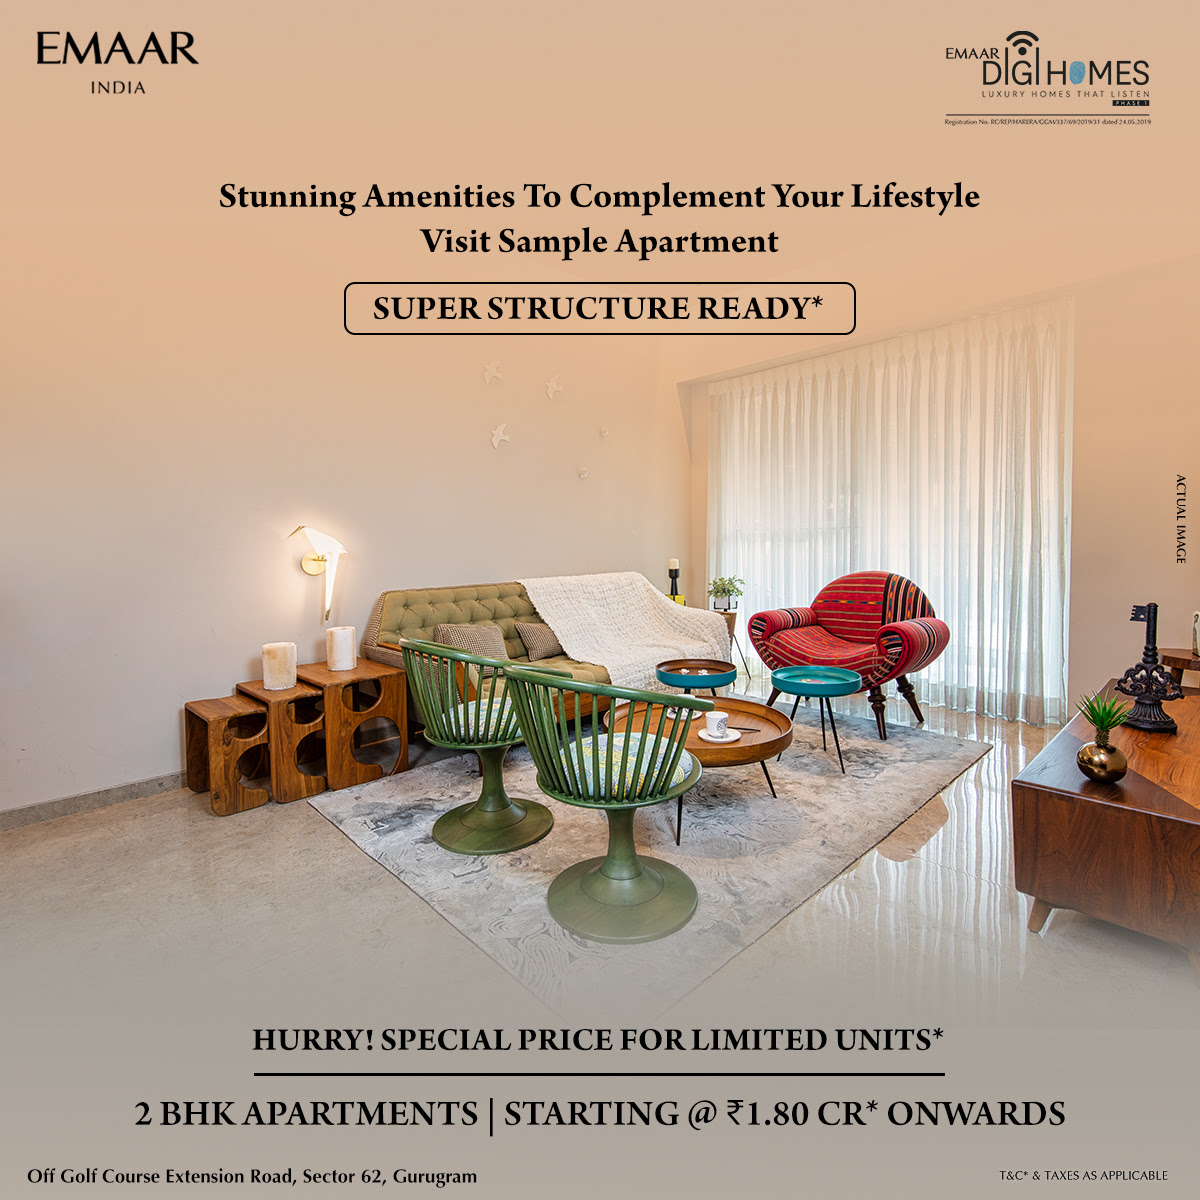 Hurry special price for limited units 2 BHK apartments Rs 1.80 Cr at  Emaar Digi Homes in Sector 62, Gurgaon Update